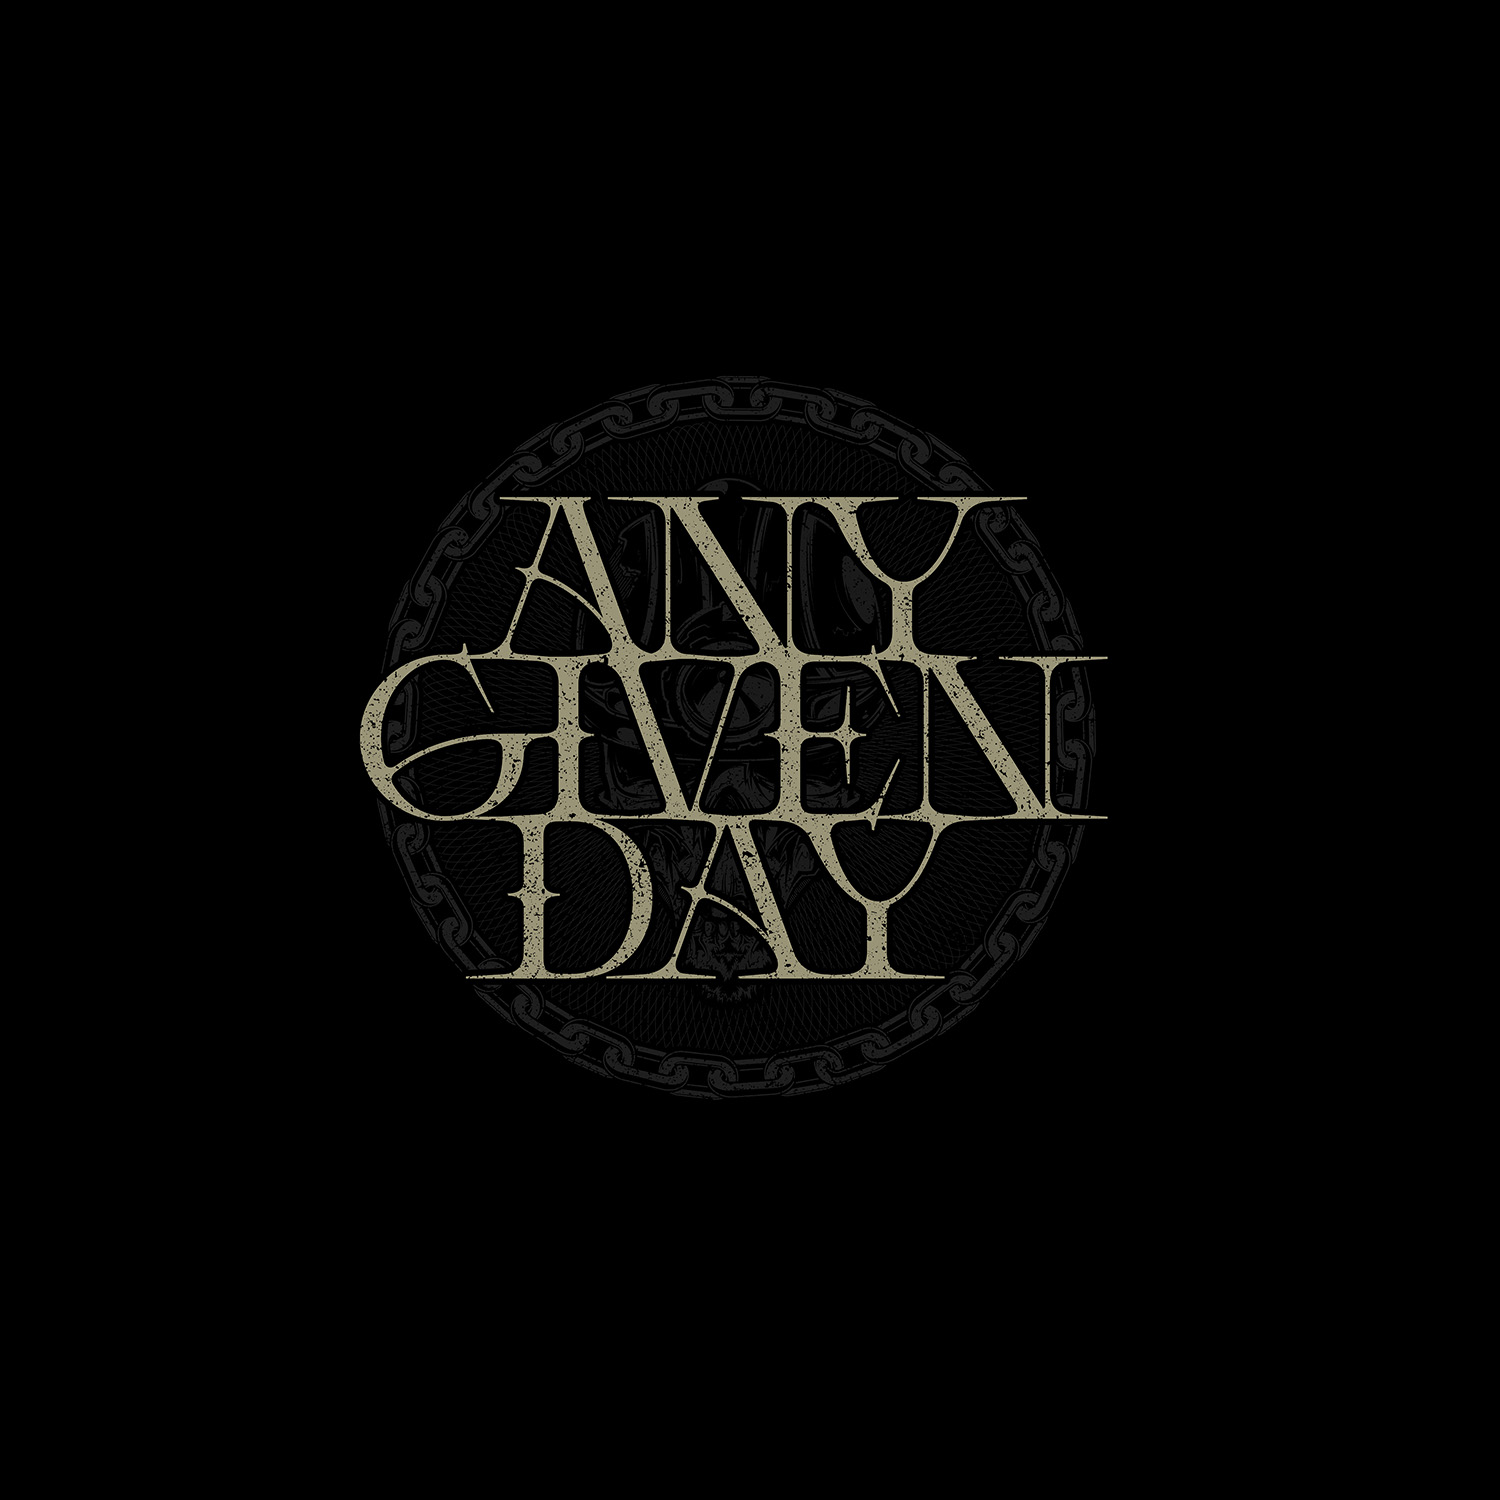 Any Given Day Get That Done Shirt T-Shirt schwarz